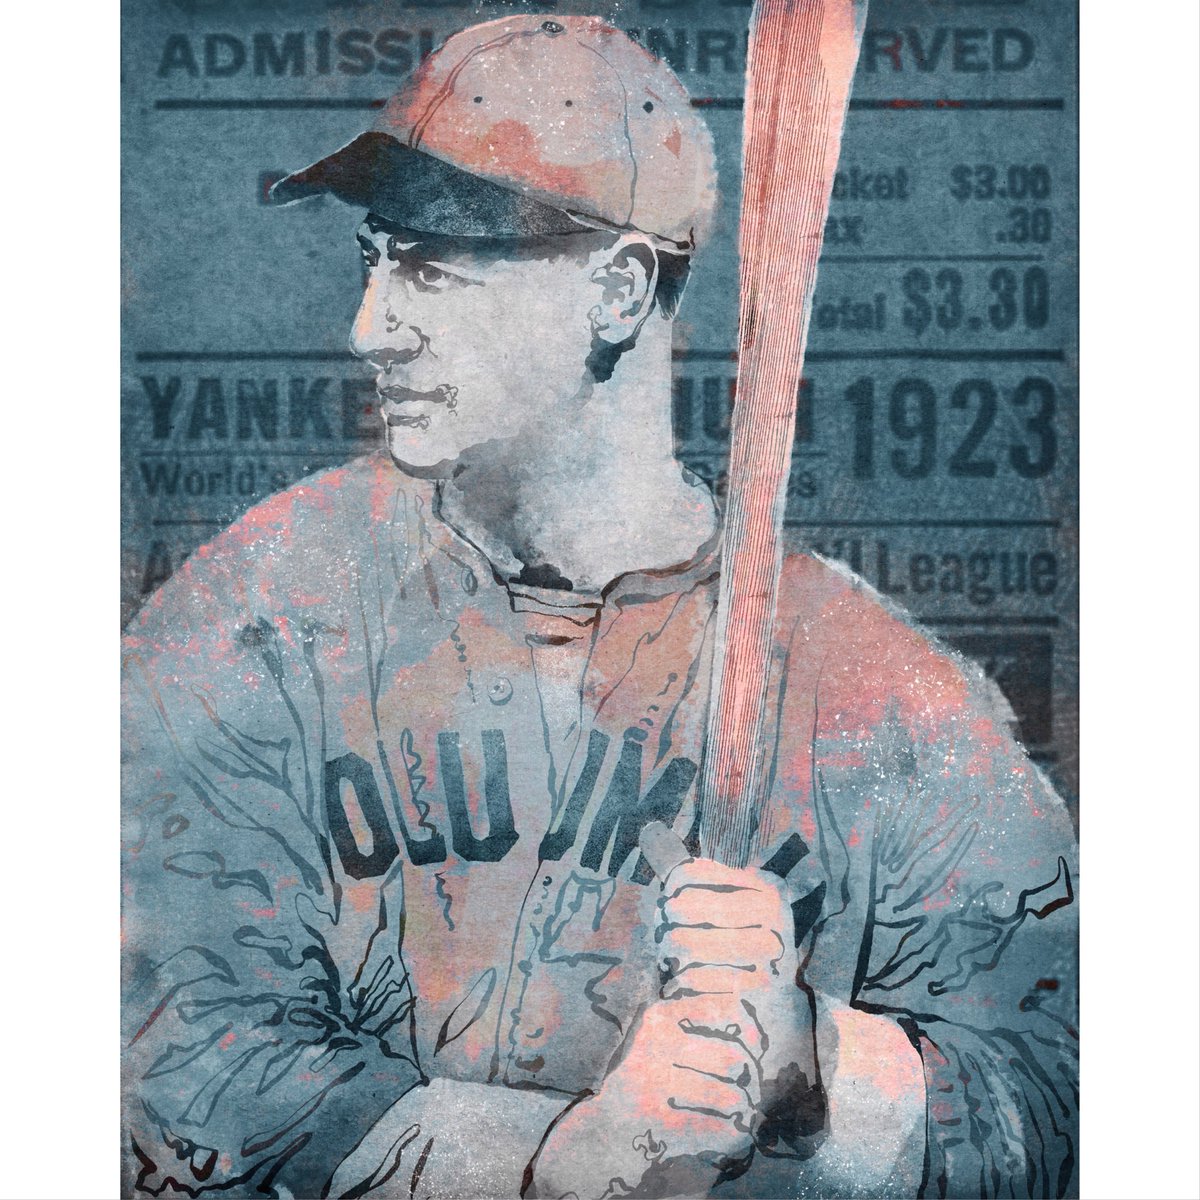 This Day in Baseball History: April 30, 1923 - The New York Yankees sign 20-year-old prospect Lou Gehrig to a contract paying him a salary of $2,000 and a bonus of $1,500.
#tripleplaydesign #iamtripleplaydesign #tpdtradingcards #design #lougehrig #nyyankees #ironhorse #baseball